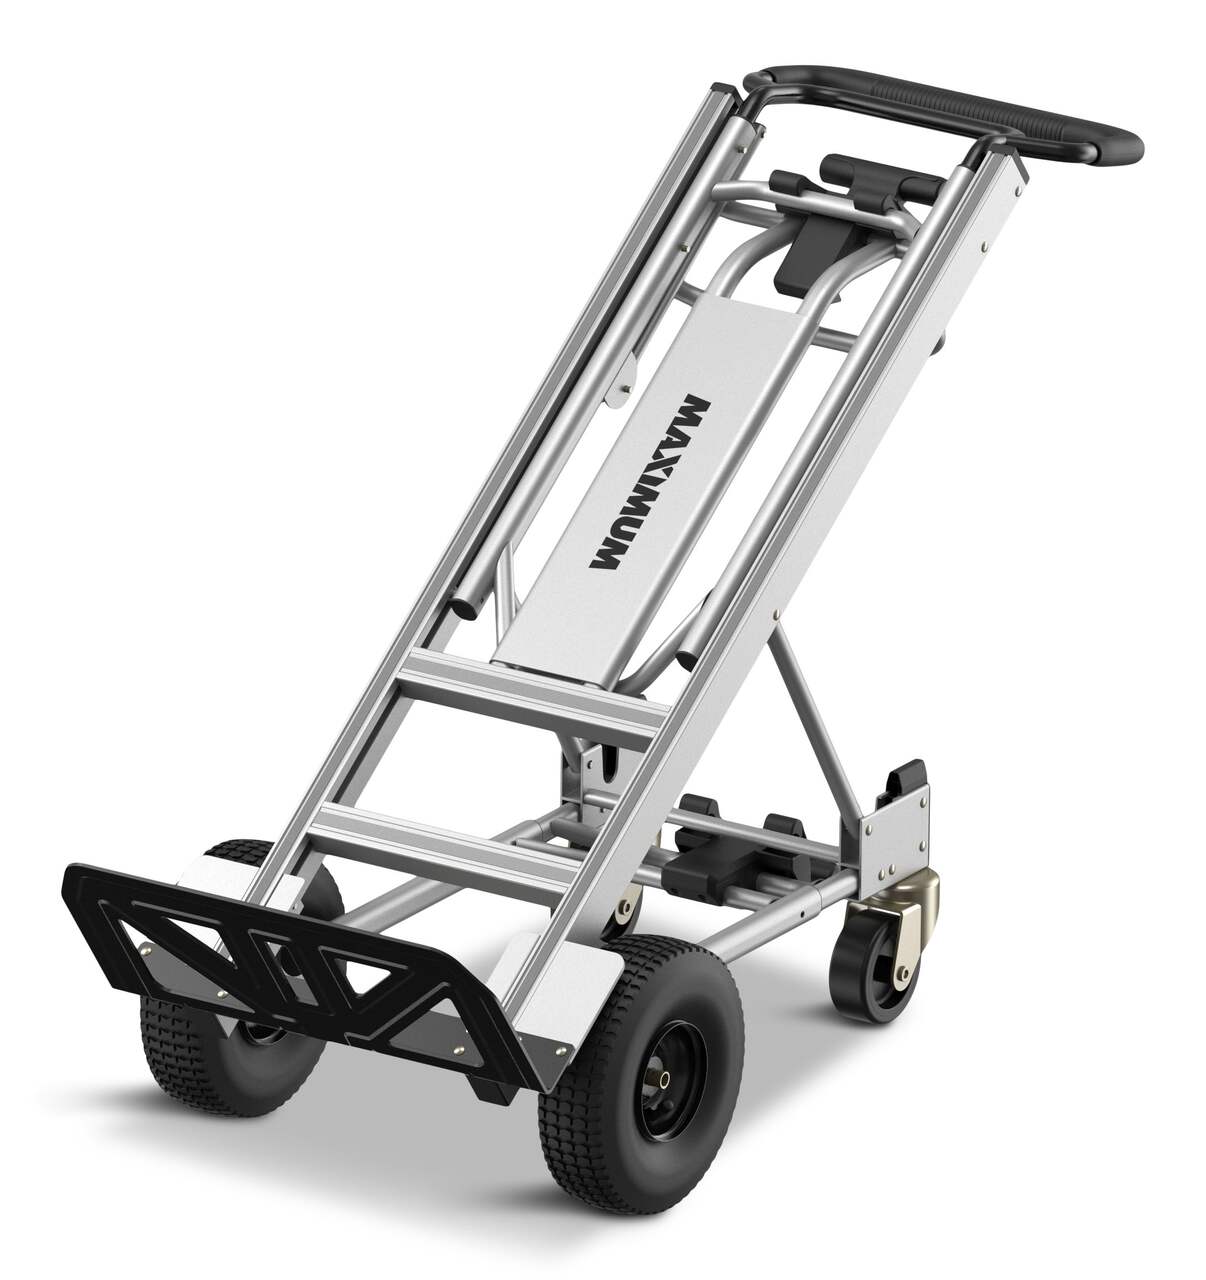 https://media-www.canadiantire.ca/product/fixing/hardware/work-accessories/0600603/maximum-3-in-1-hybrid-aluminum-hand-truck-800lb-1000lb-4813a01a-59c6-47c4-8899-dcdb8d461d47-jpgrendition.jpg?imdensity=1&imwidth=640&impolicy=mZoom